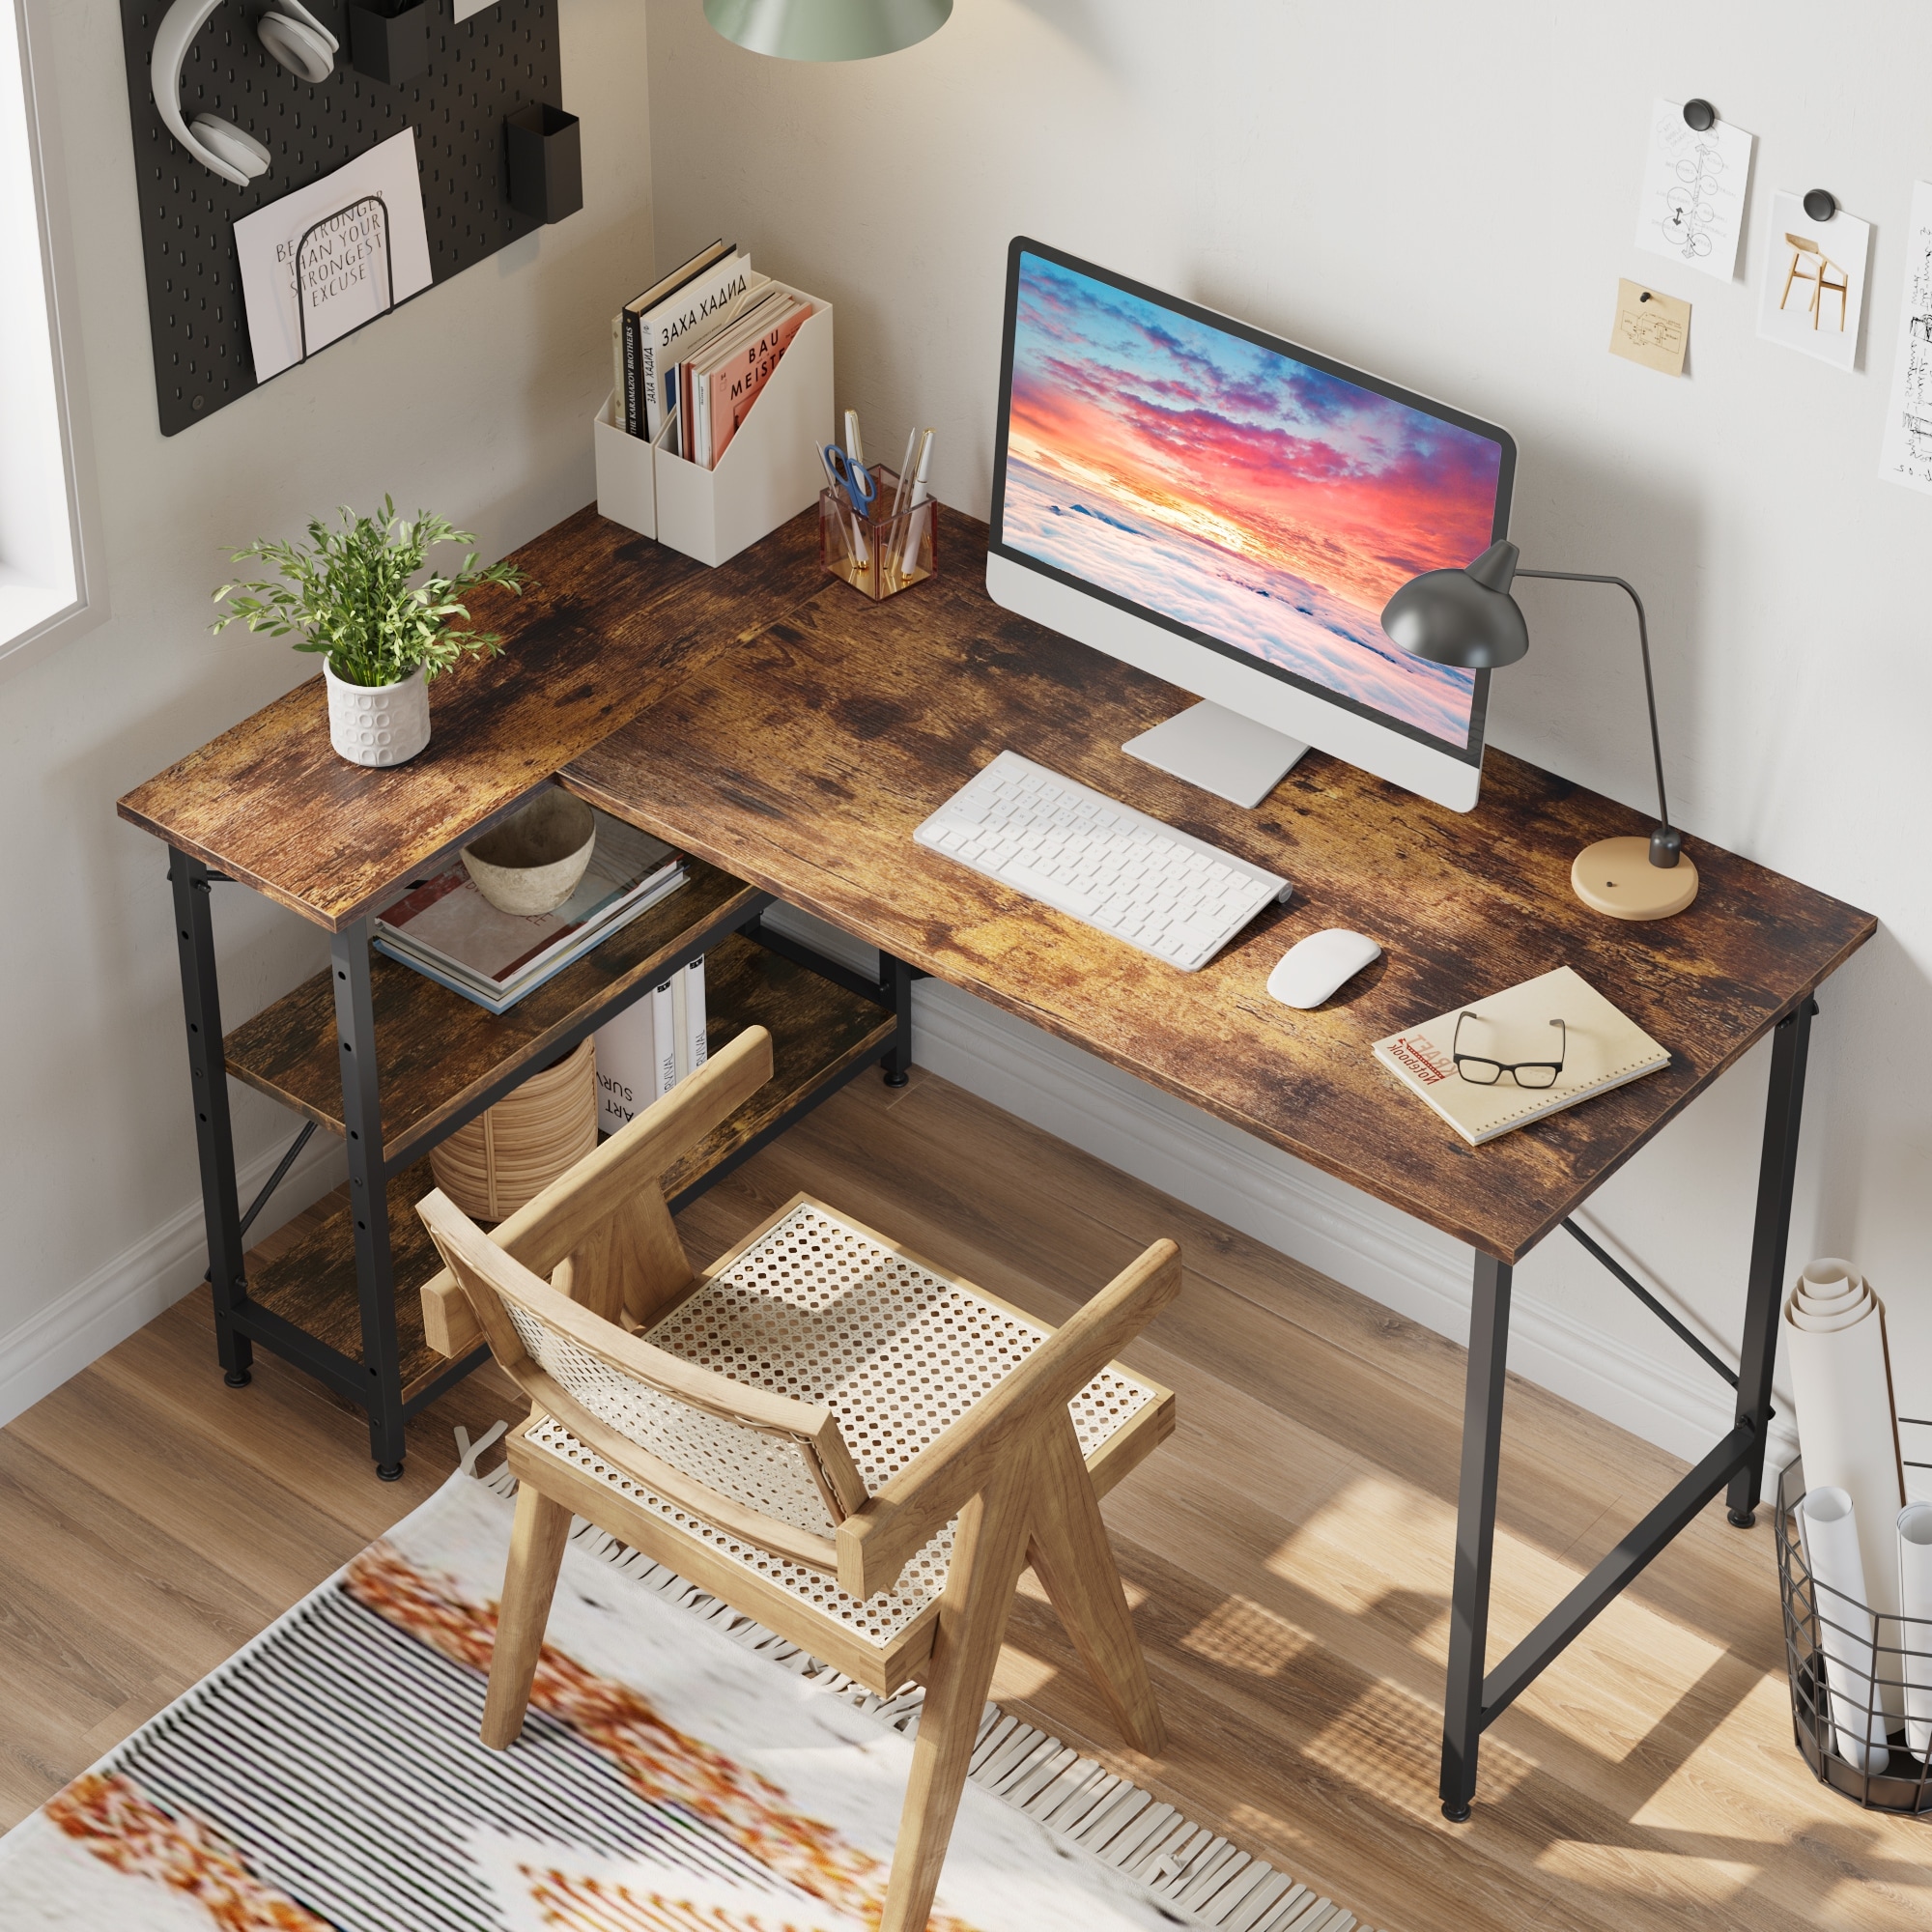 https://ak1.ostkcdn.com/images/products/is/images/direct/81485f995aeeaee80eed9f15fcec4337f17355ad/Small-L-Shaped-Desk-with-Storage-Shelves-Corner-Computer-Desk.jpg